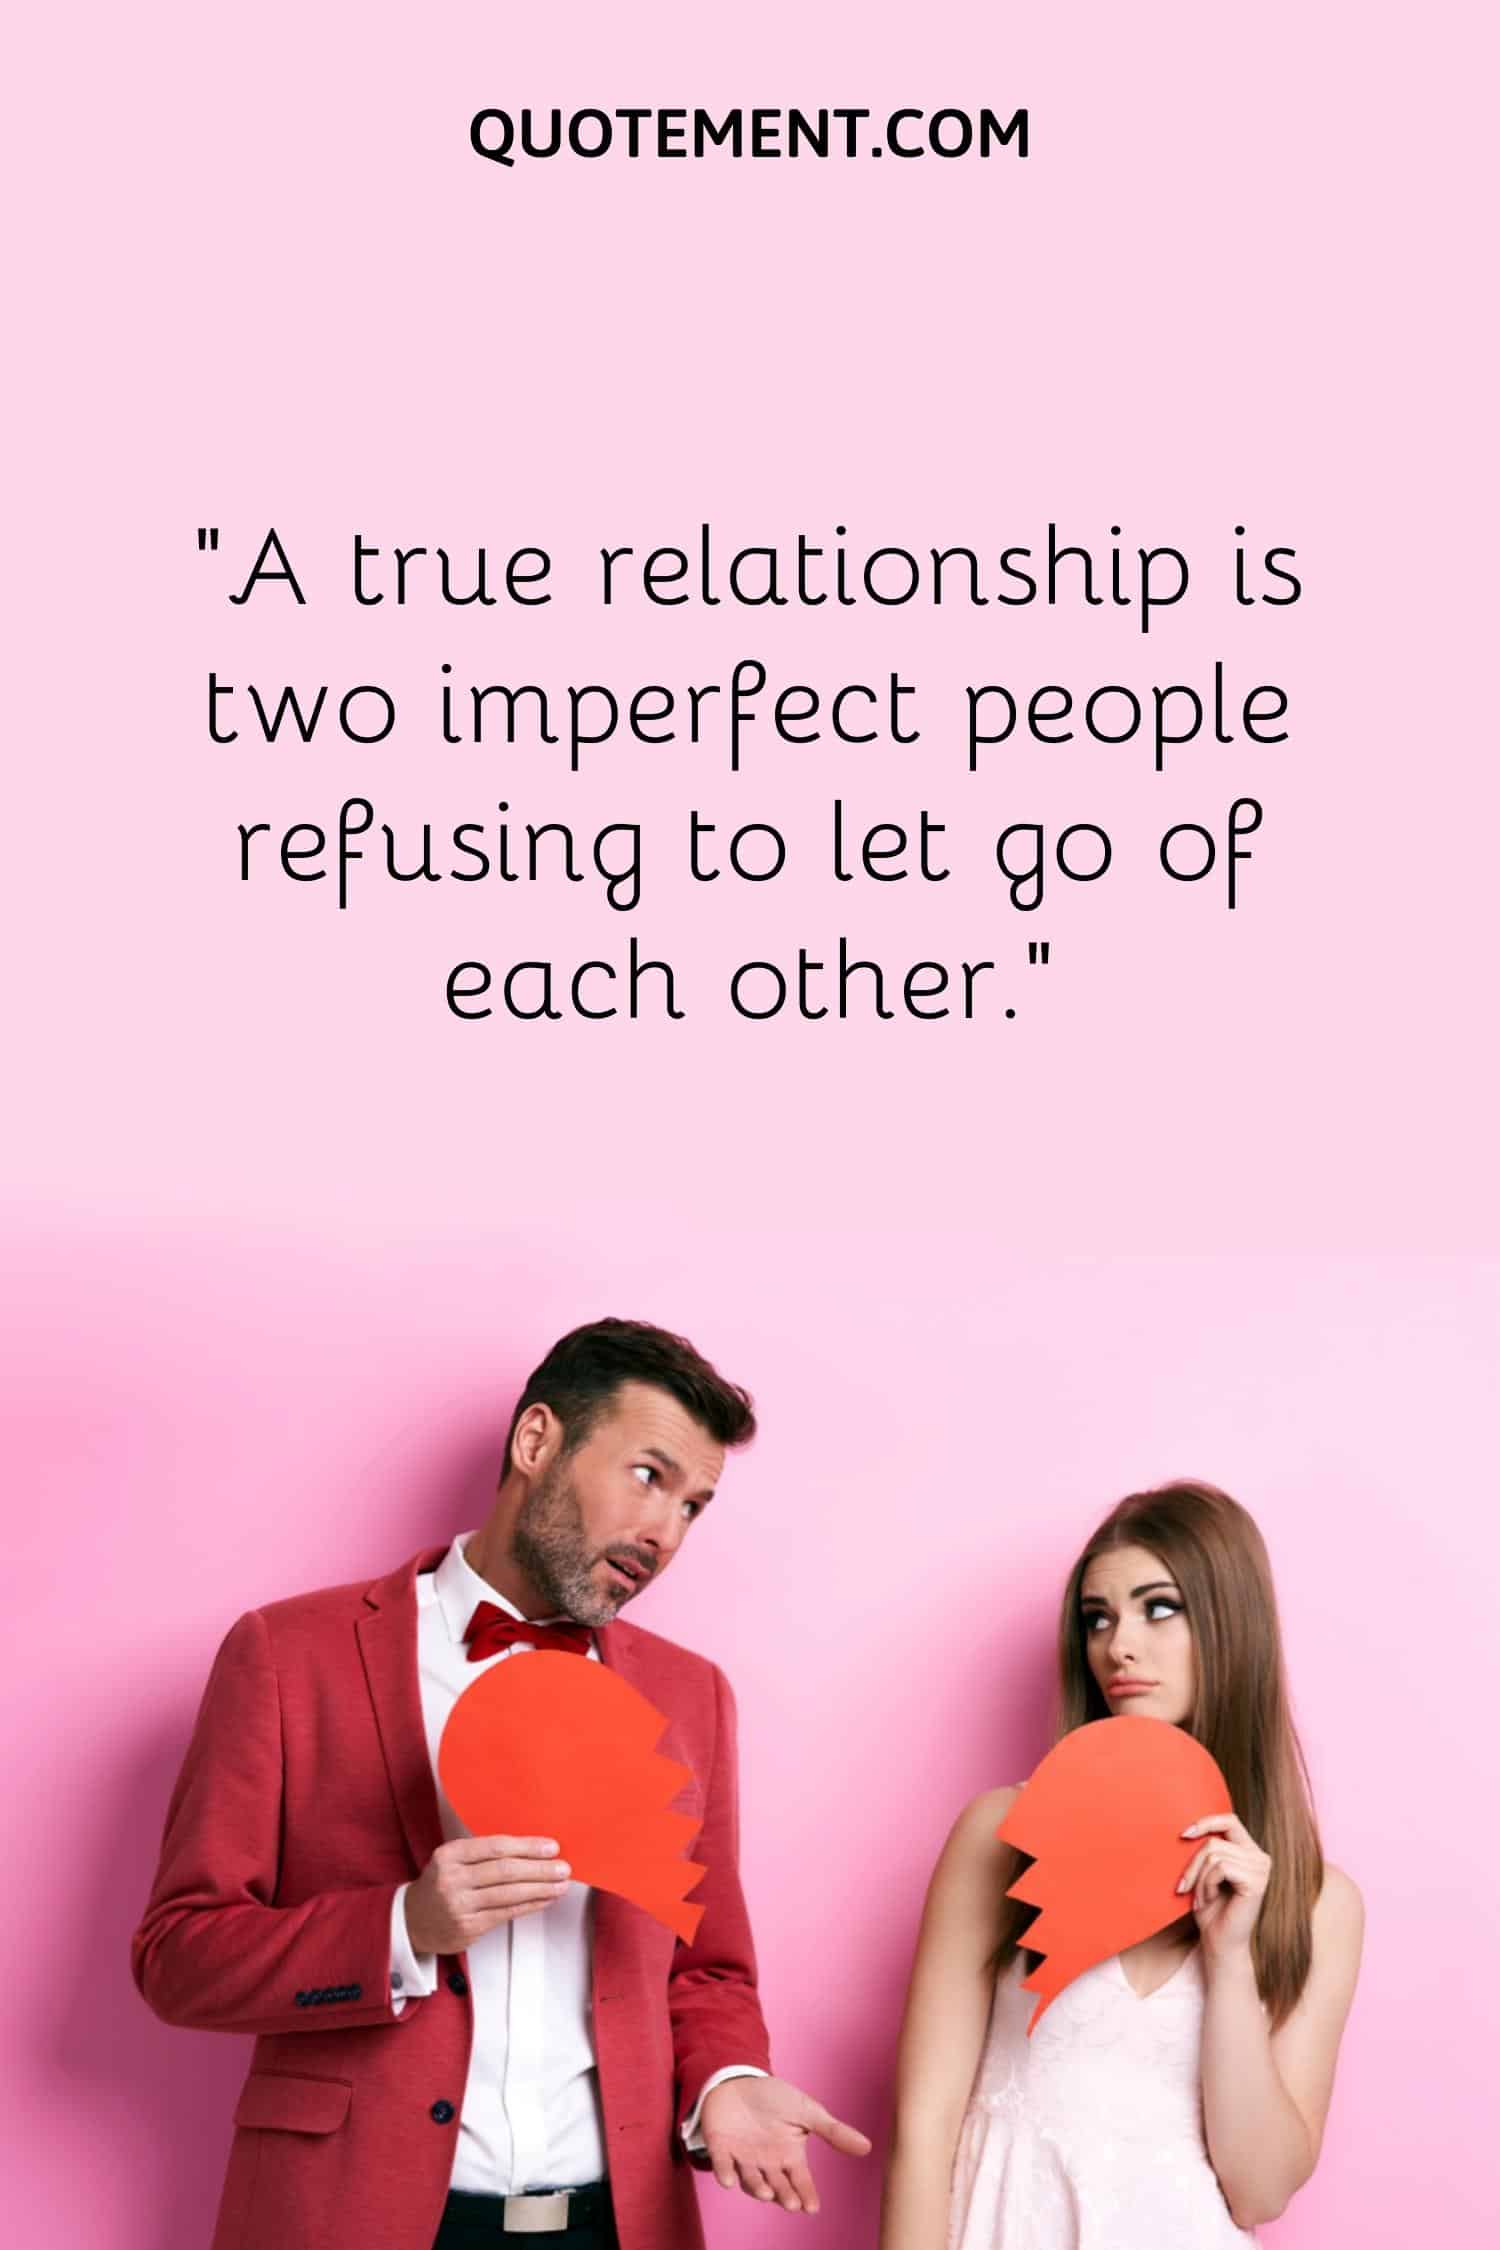 “A true relationship is two imperfect people refusing to let go of each other.”